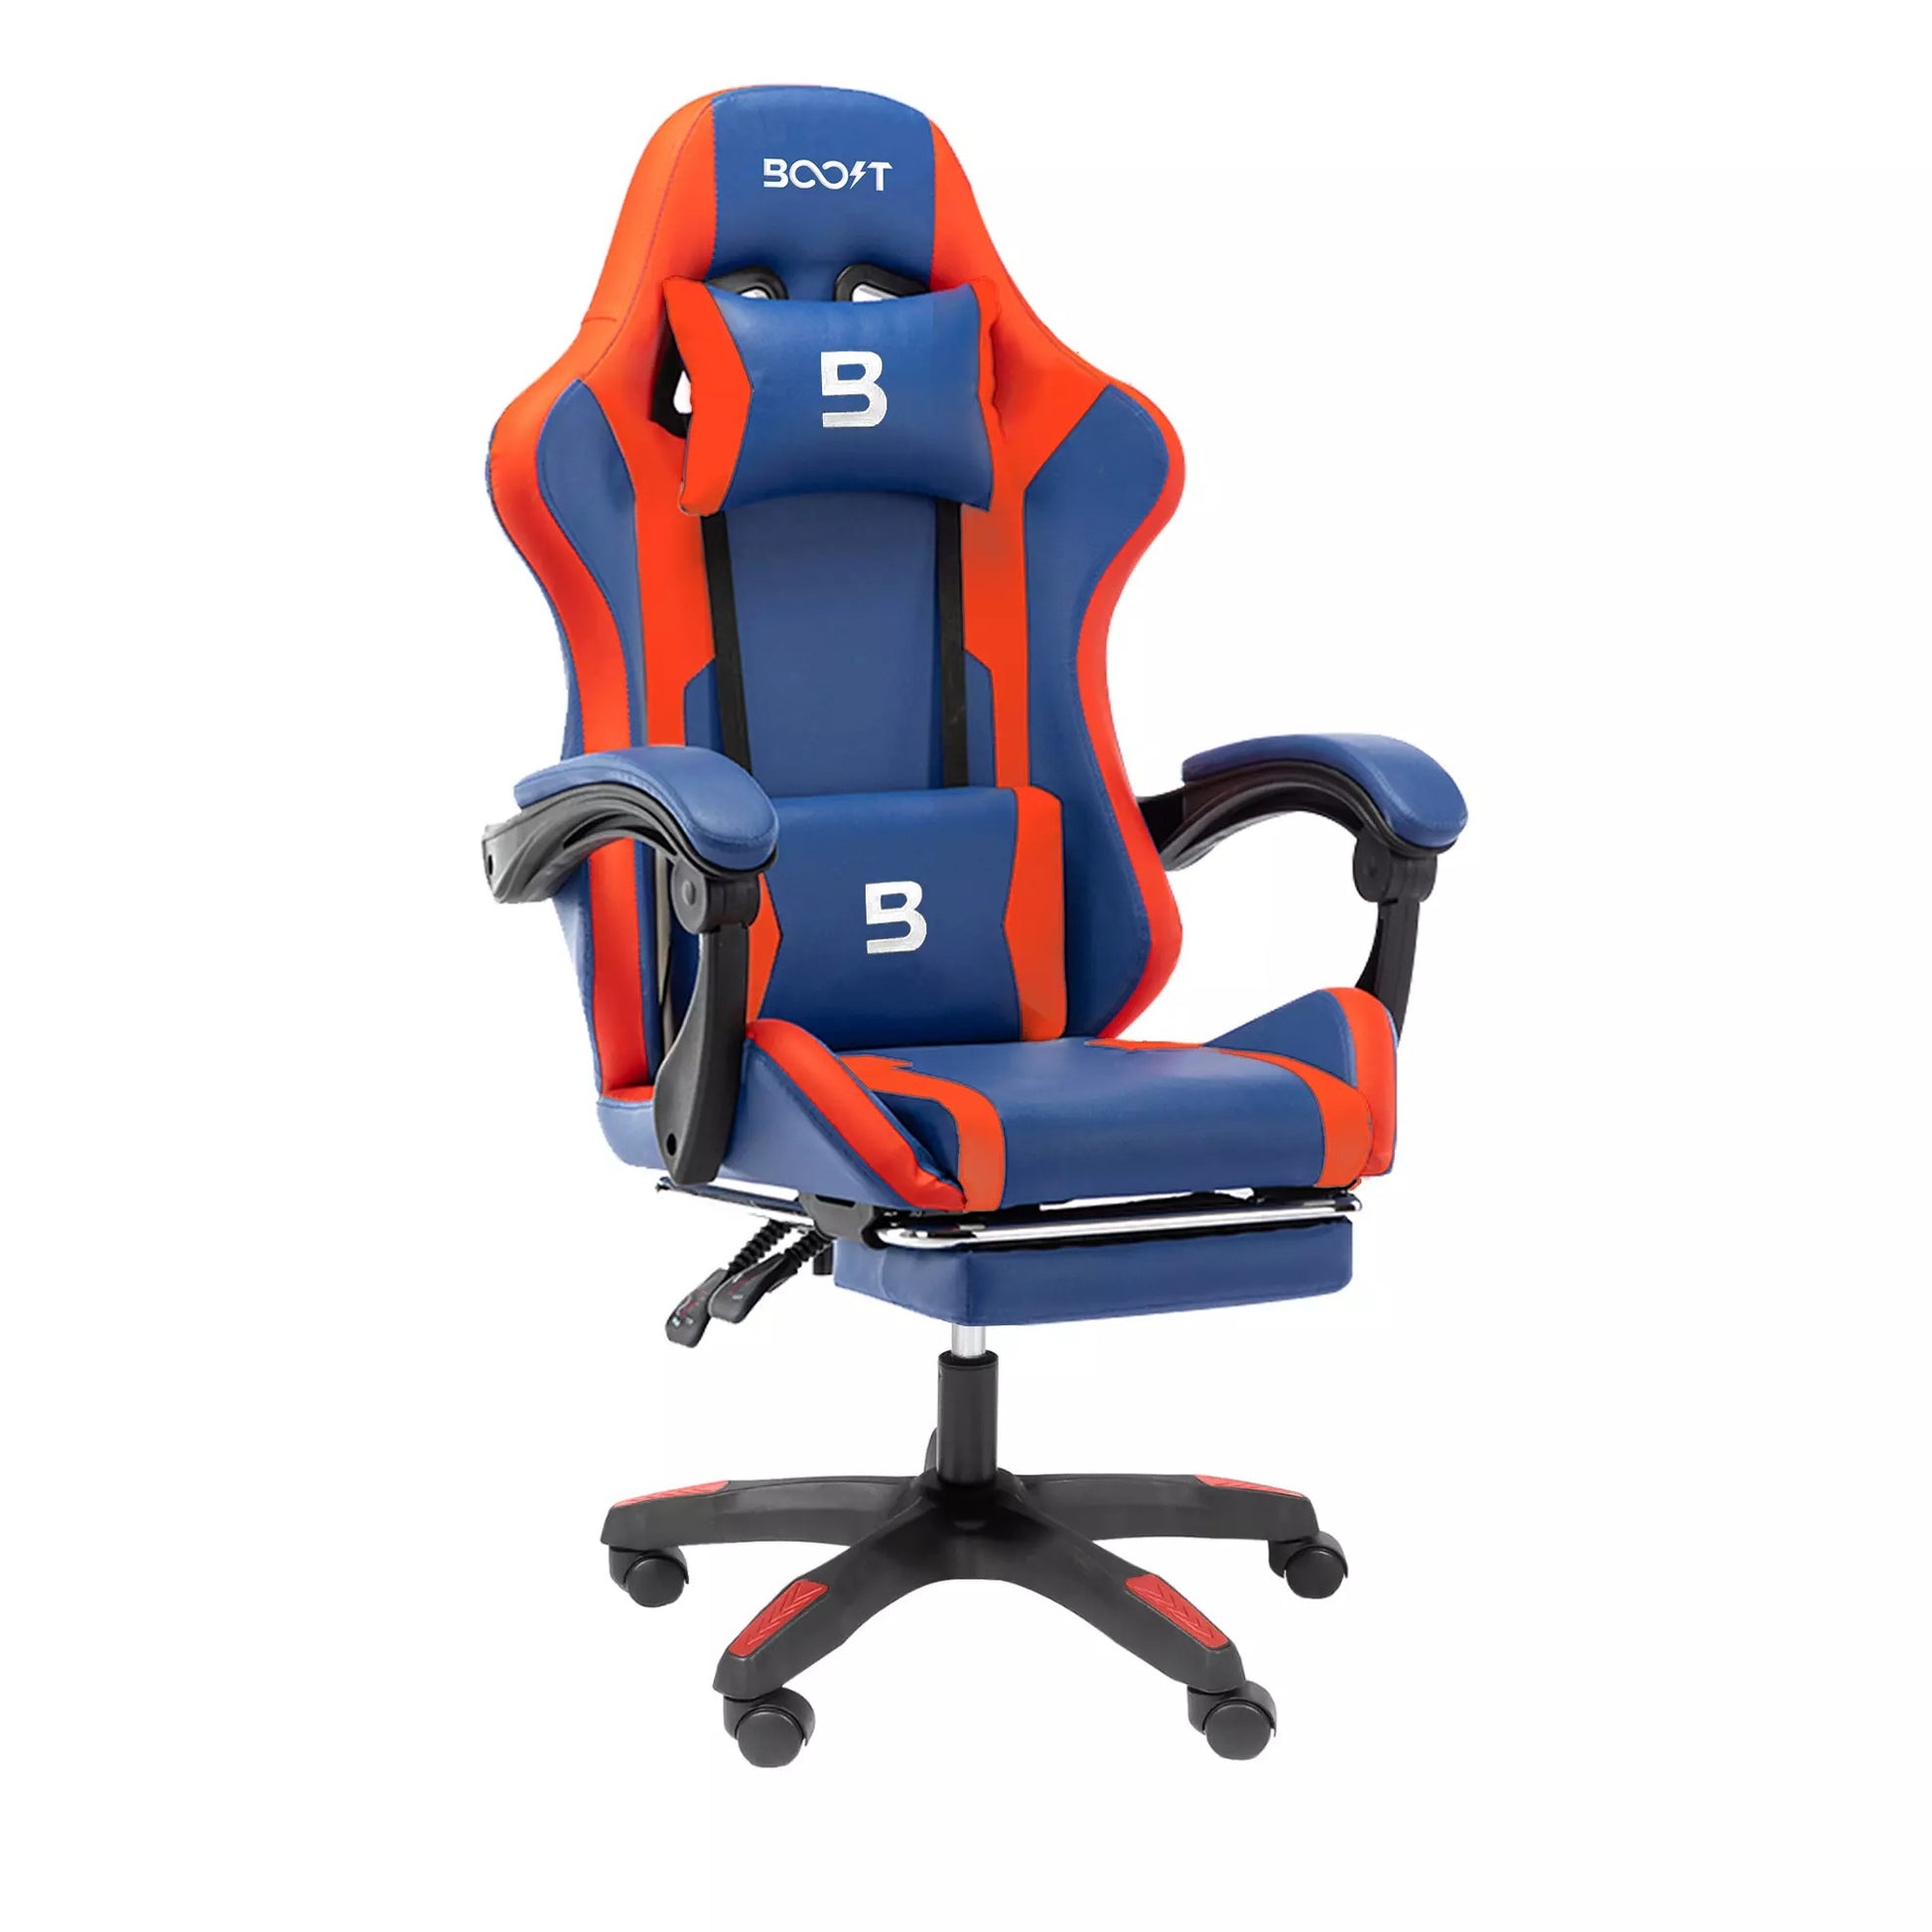 Boost Surge Gaming Blue Chair Price in Pakistan